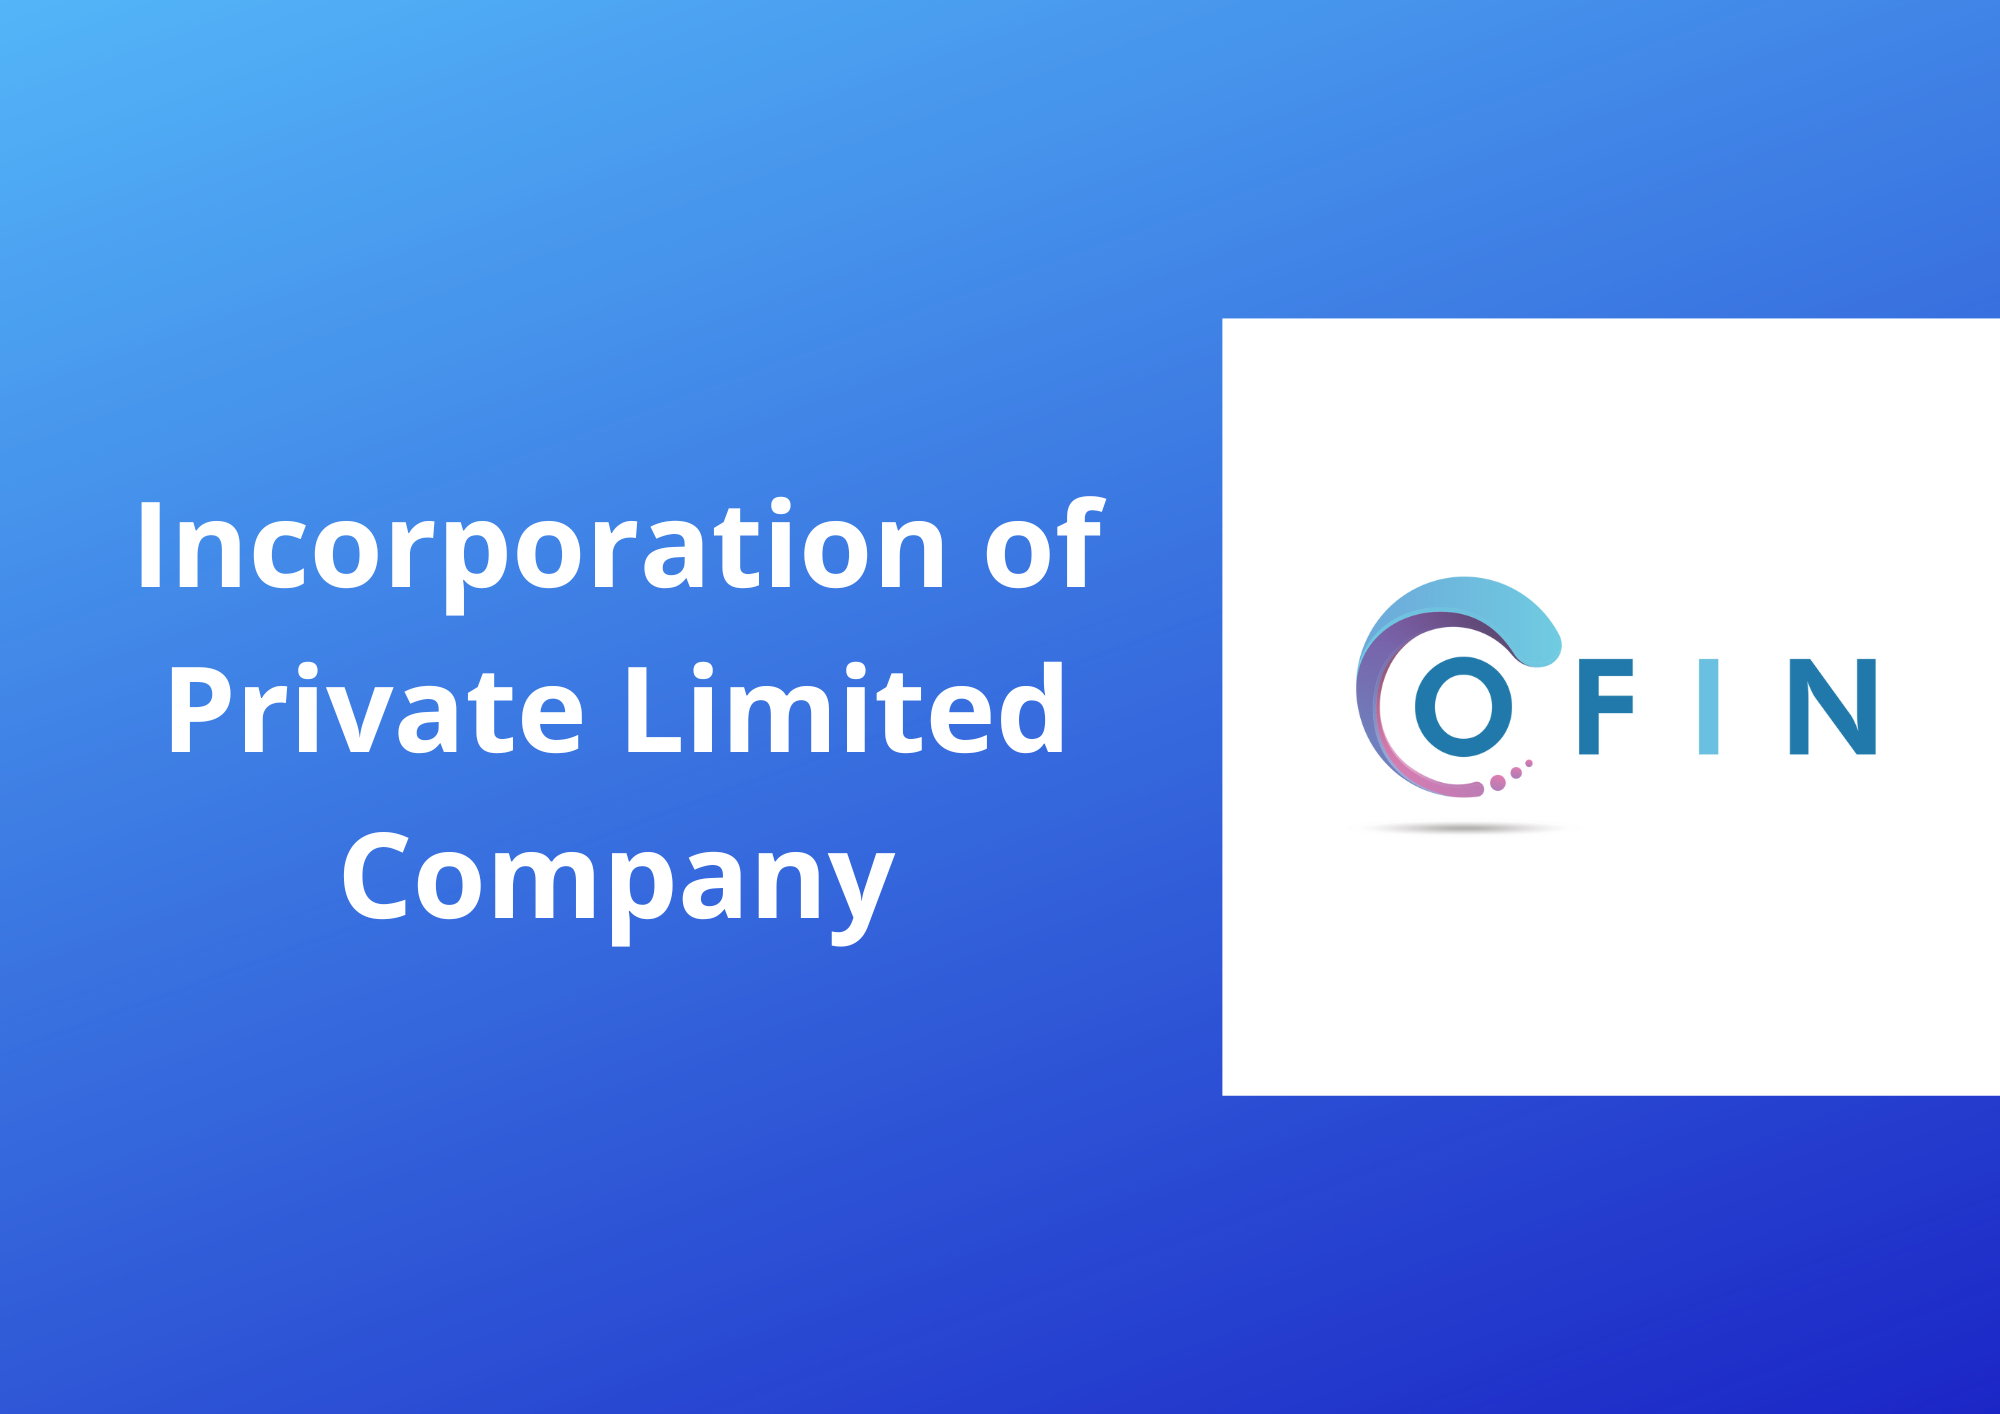 Incorporation of Private Limited Company